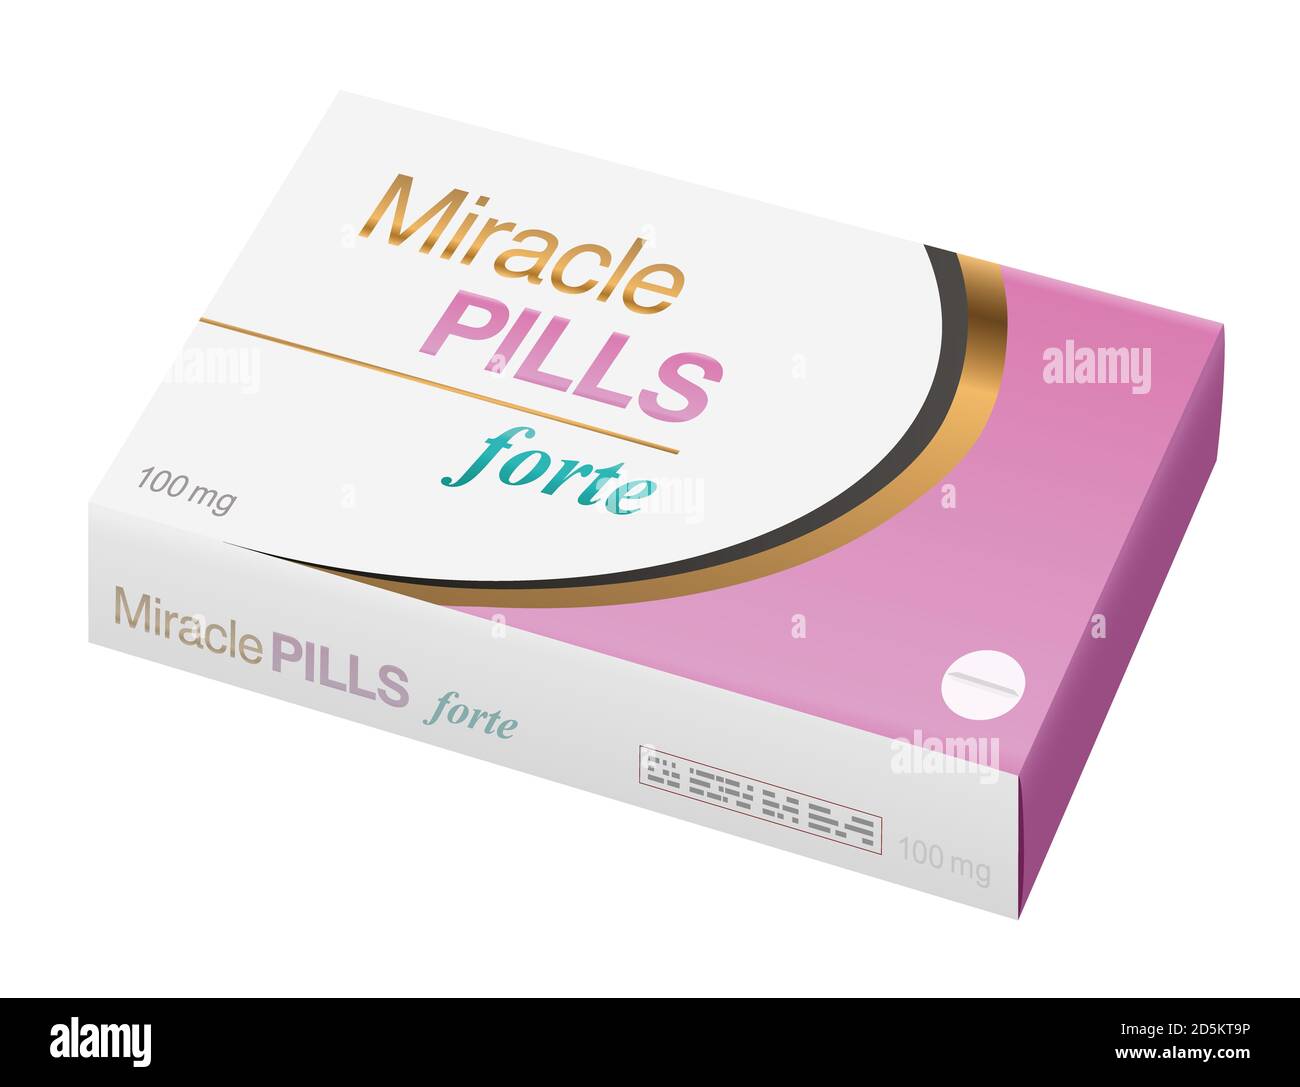 Miracle pills - fake medicine packet, a medical panacea product to promise magically cure, assured health or other wonders concerning healing issues. Stock Photo